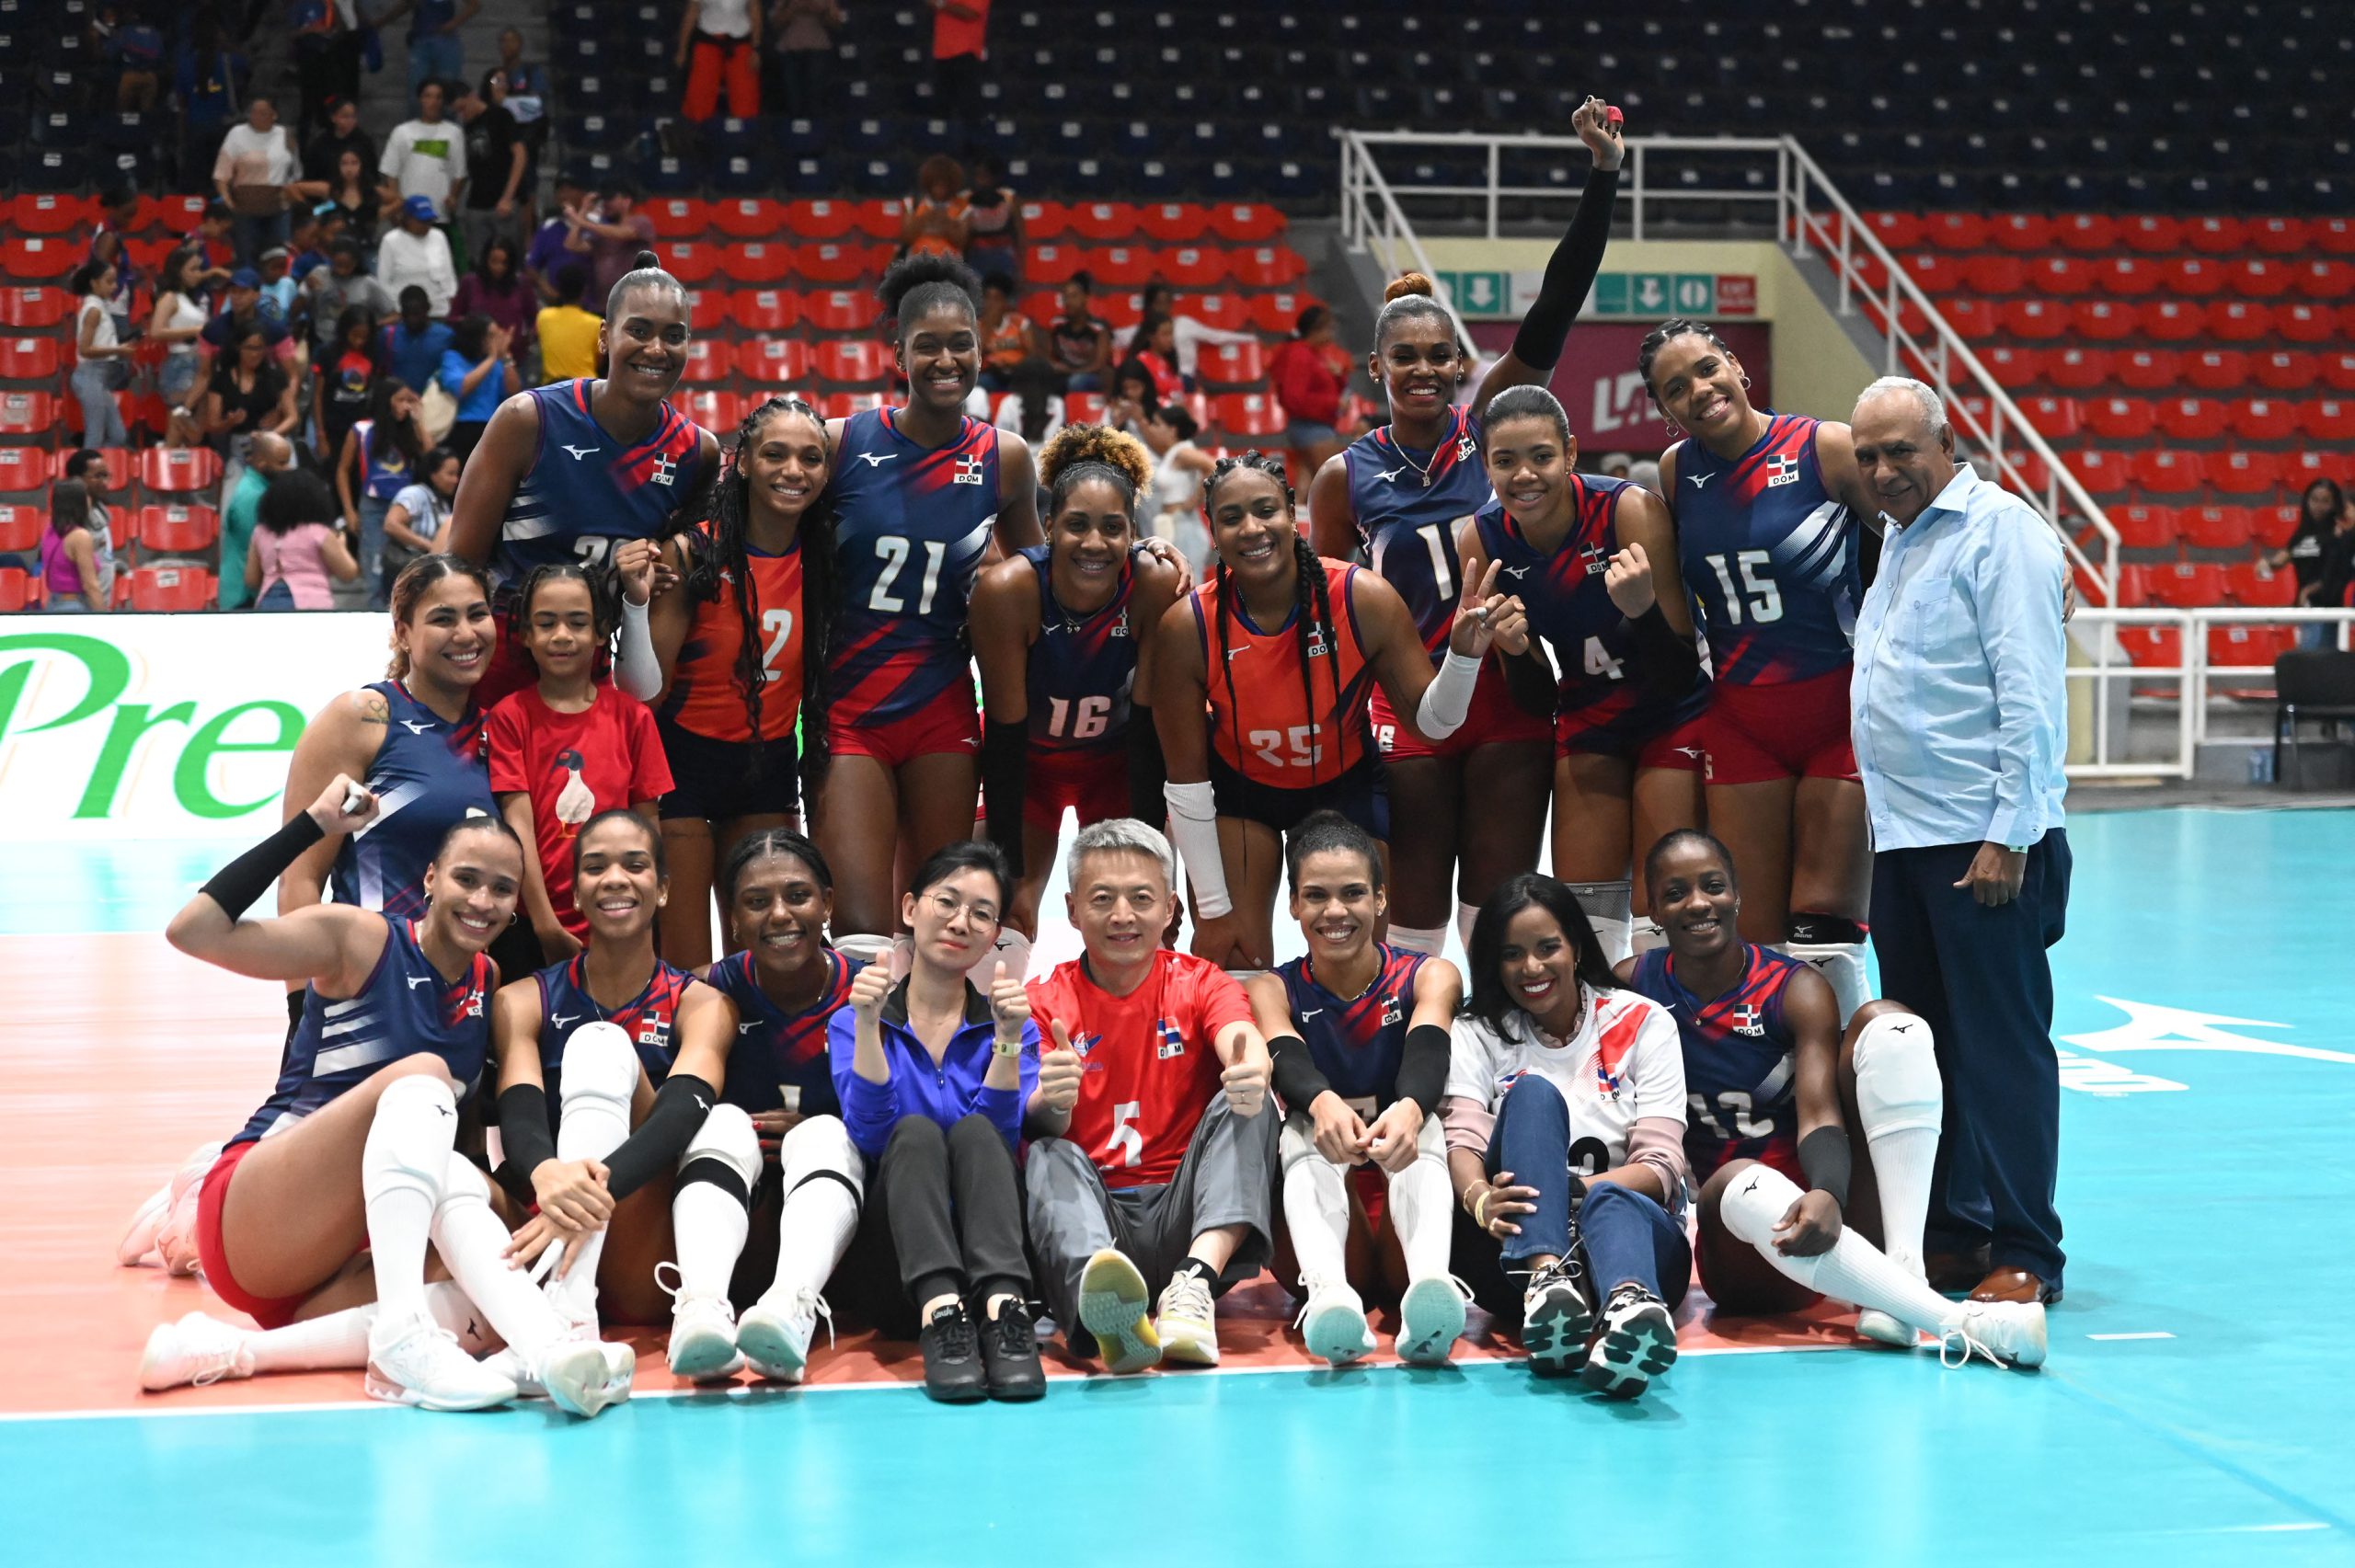 Dominican Republic wins against Cuba in electrifying match